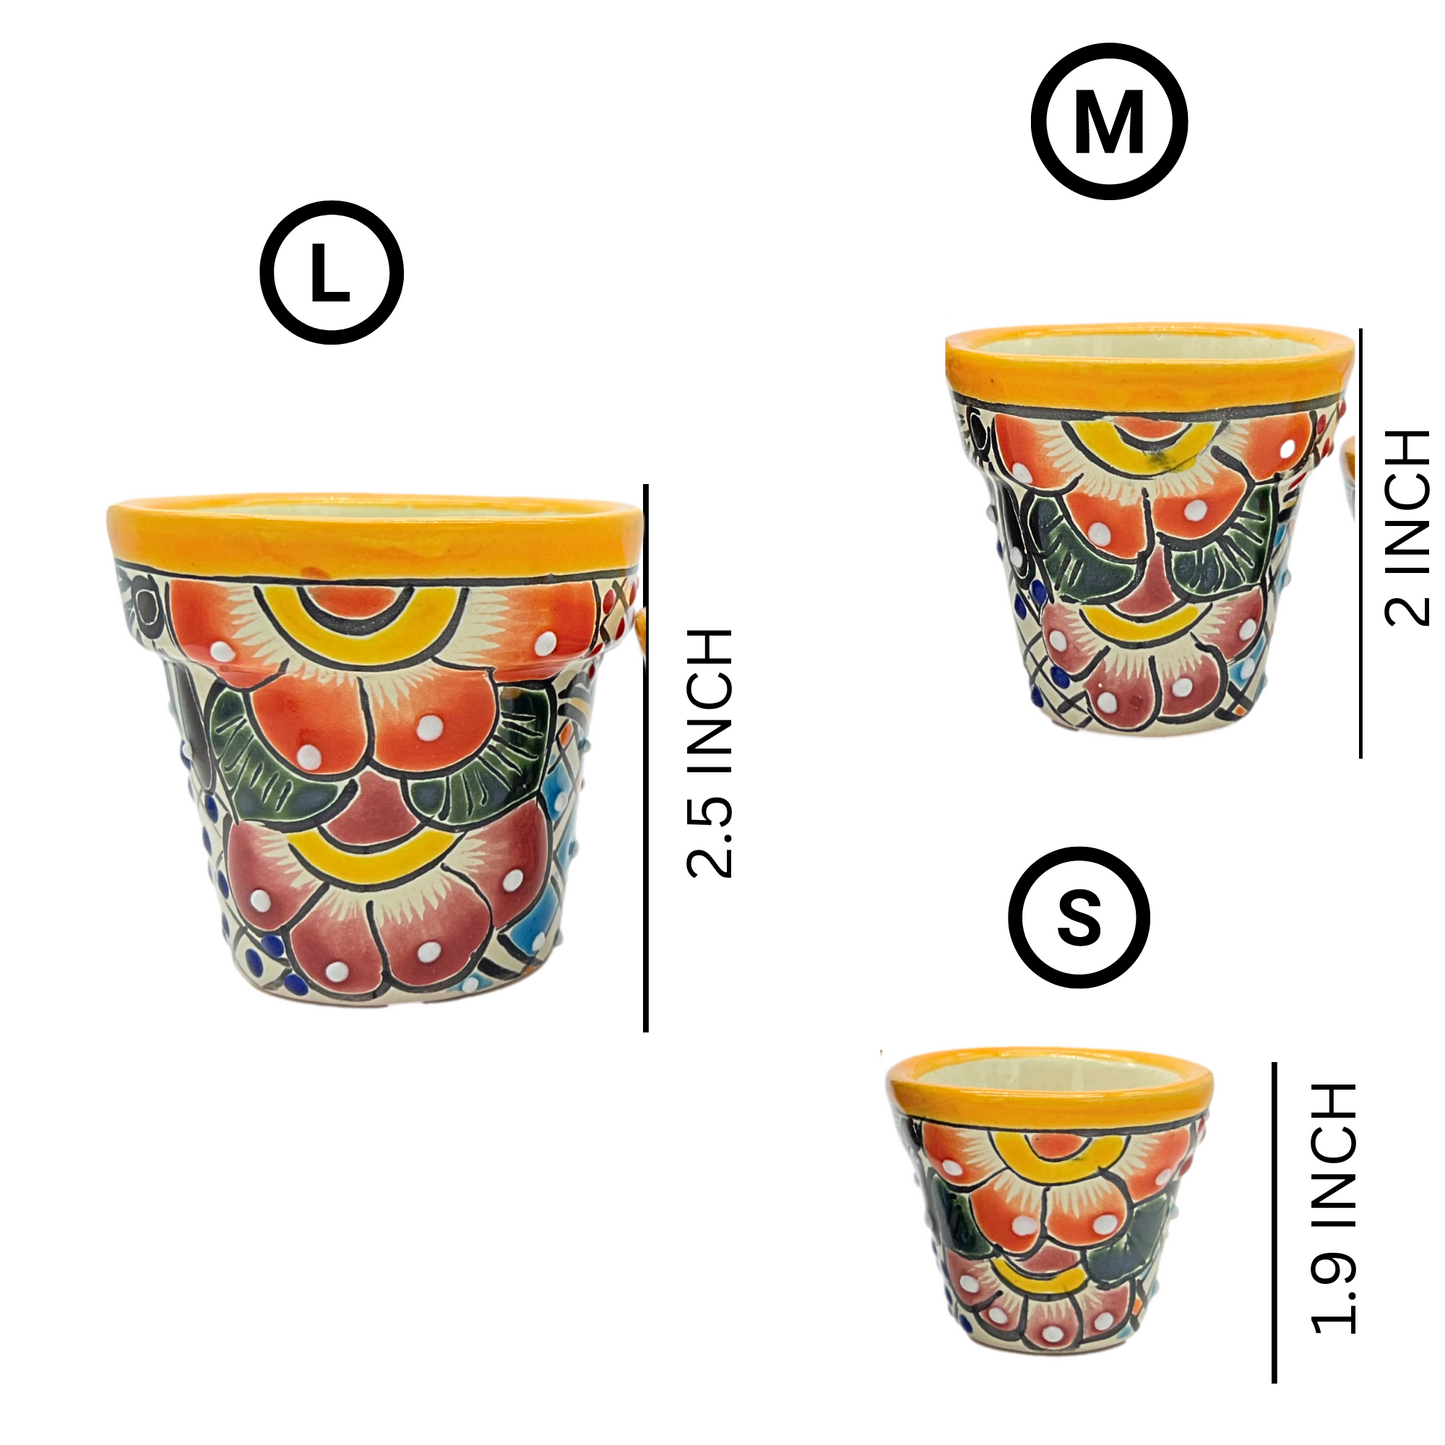 size of Talavera Ceramic Mini Plant Pots, hand-painted with vibrant designs by Mexican artisans, perfect for small plants and interior decor.